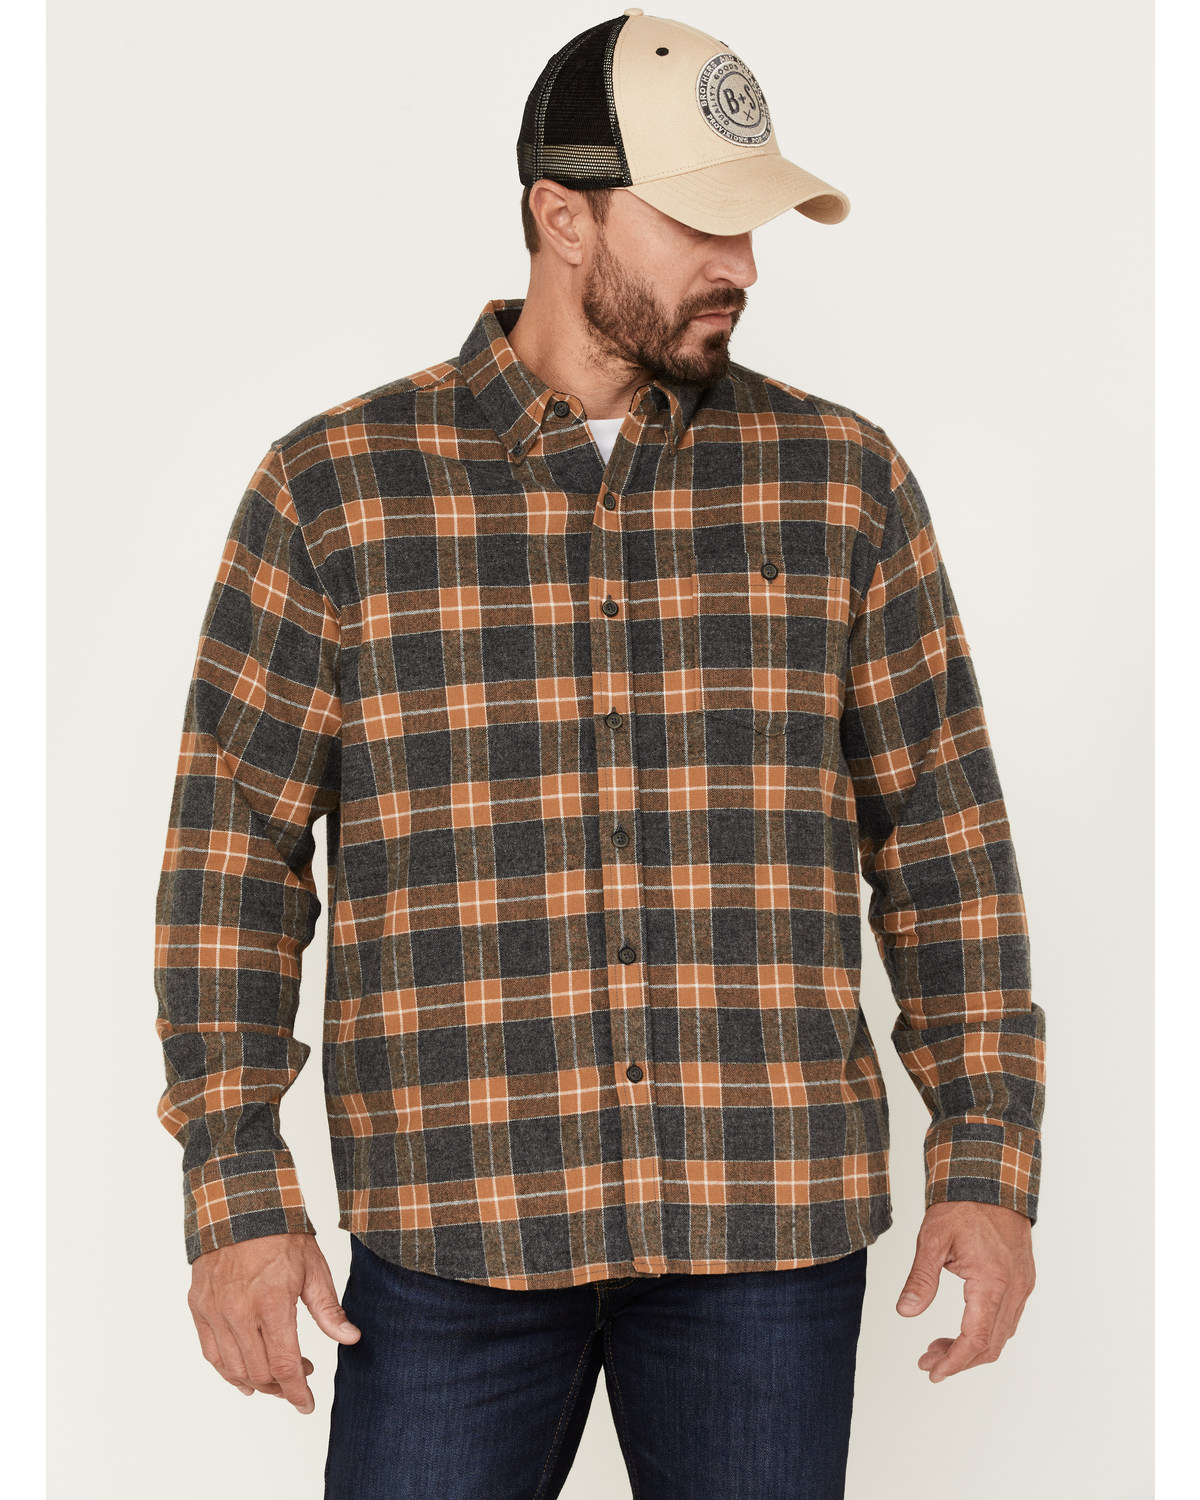 North River Men's Small Plaid Flannel Long Sleeve Button-Down Shirt